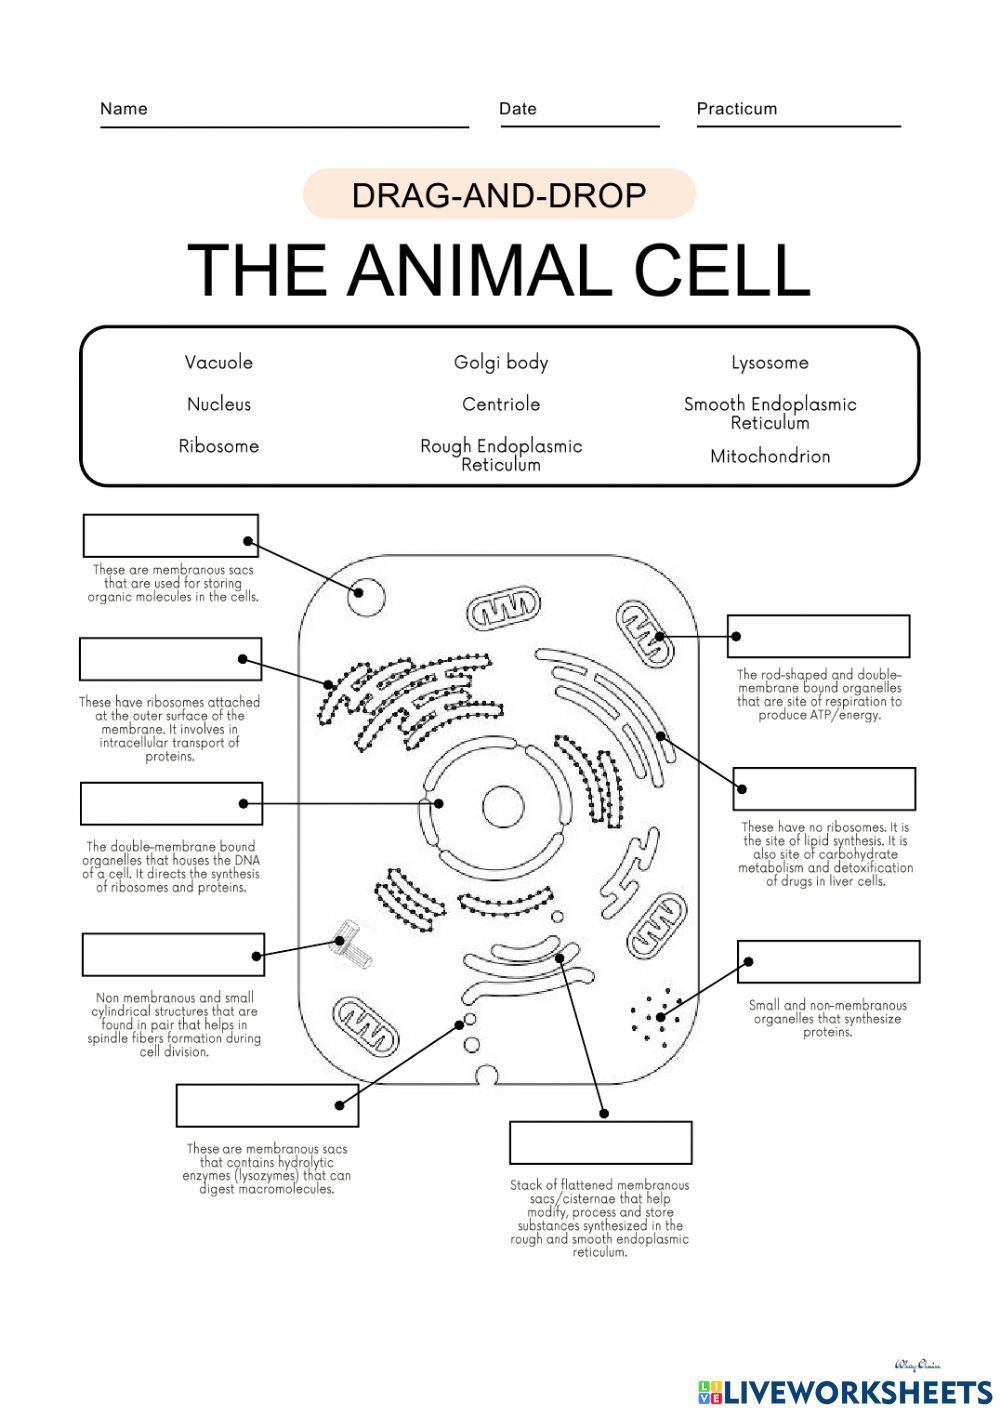 Plant Cell and Animal Cell worksheet